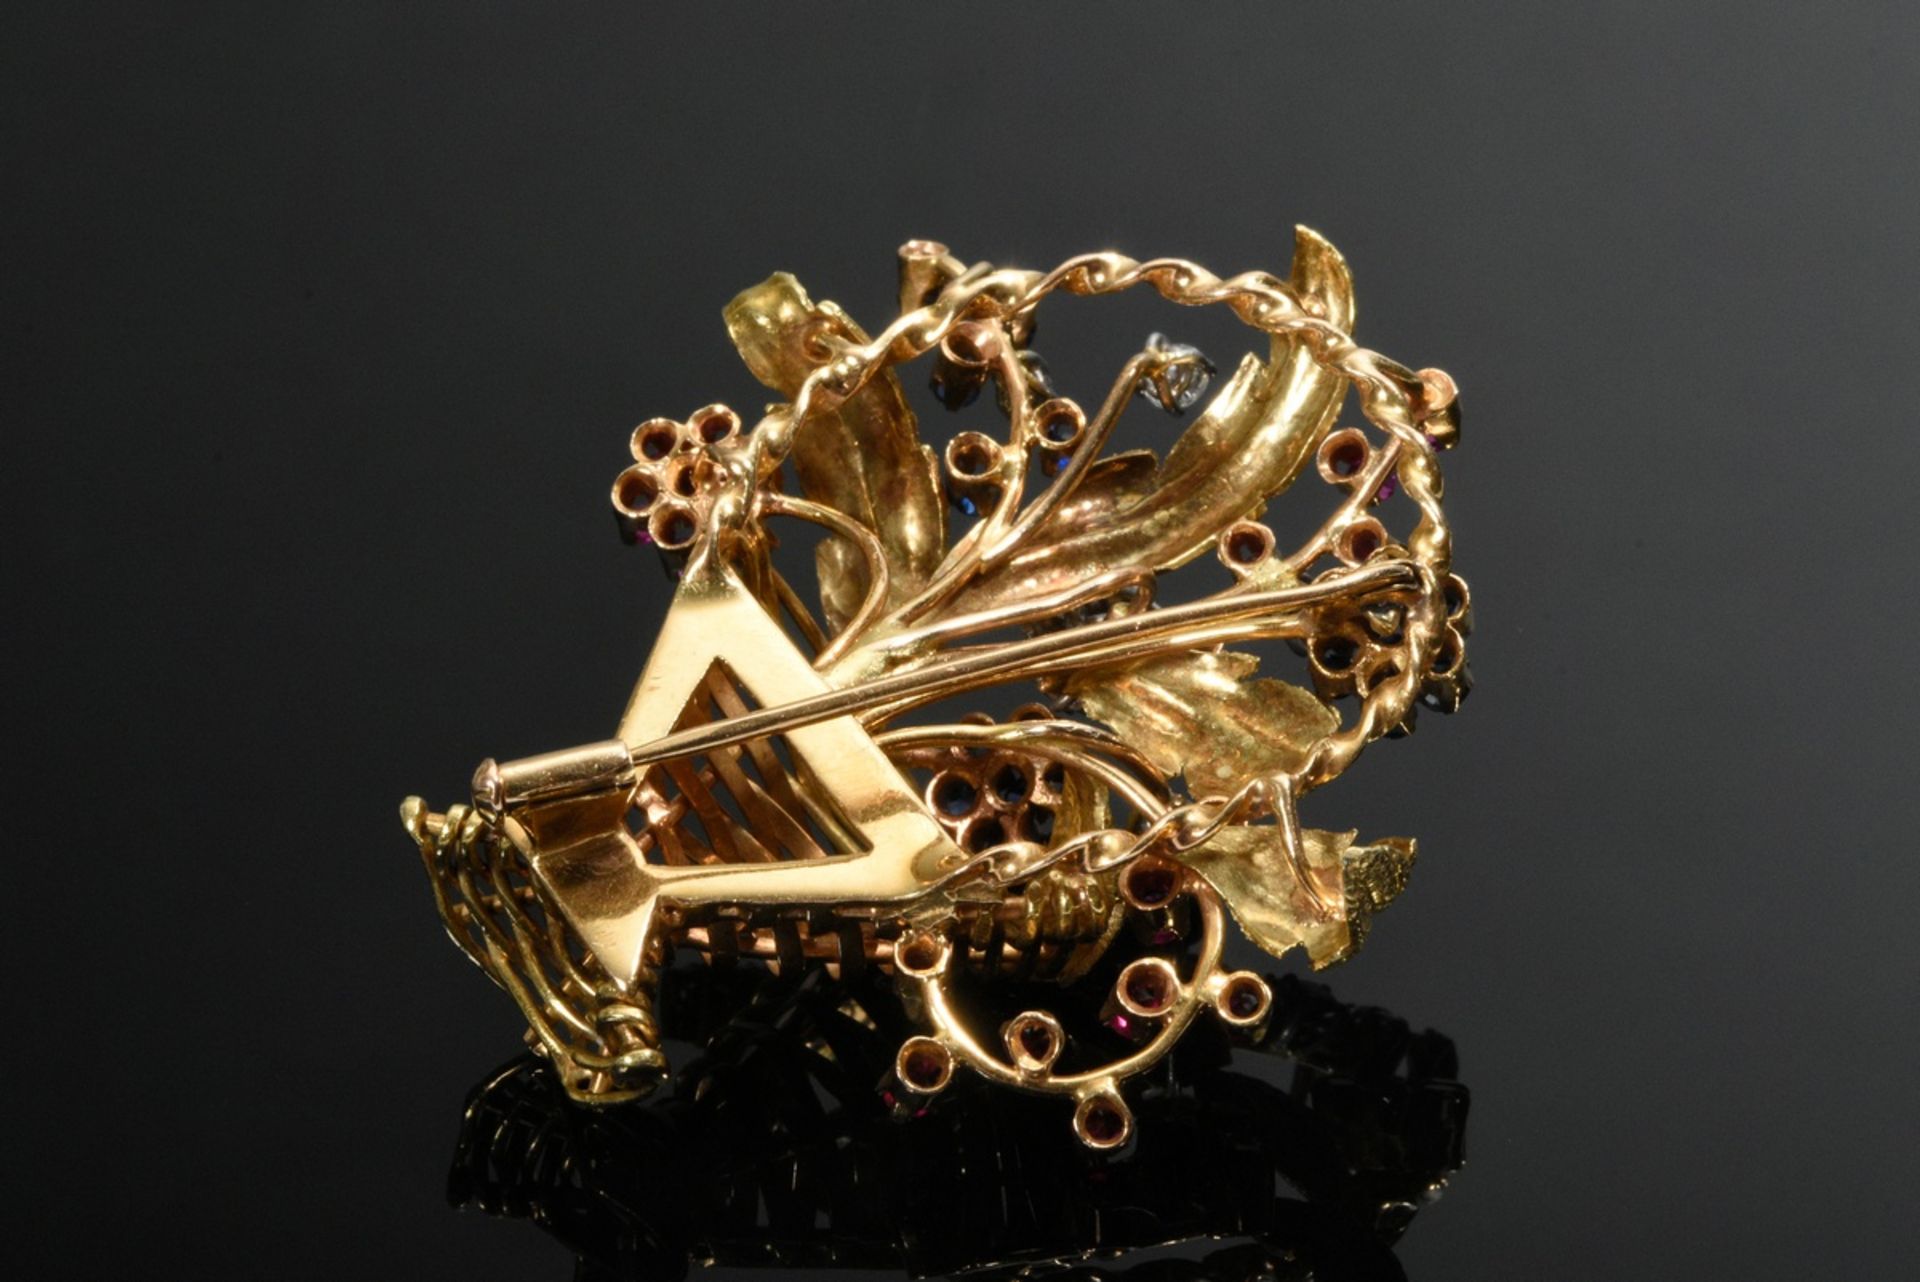 Fine yellow gold 750 flower basket needle with sapphires, rubies and brilliant-cut diamonds (approx - Image 3 of 3